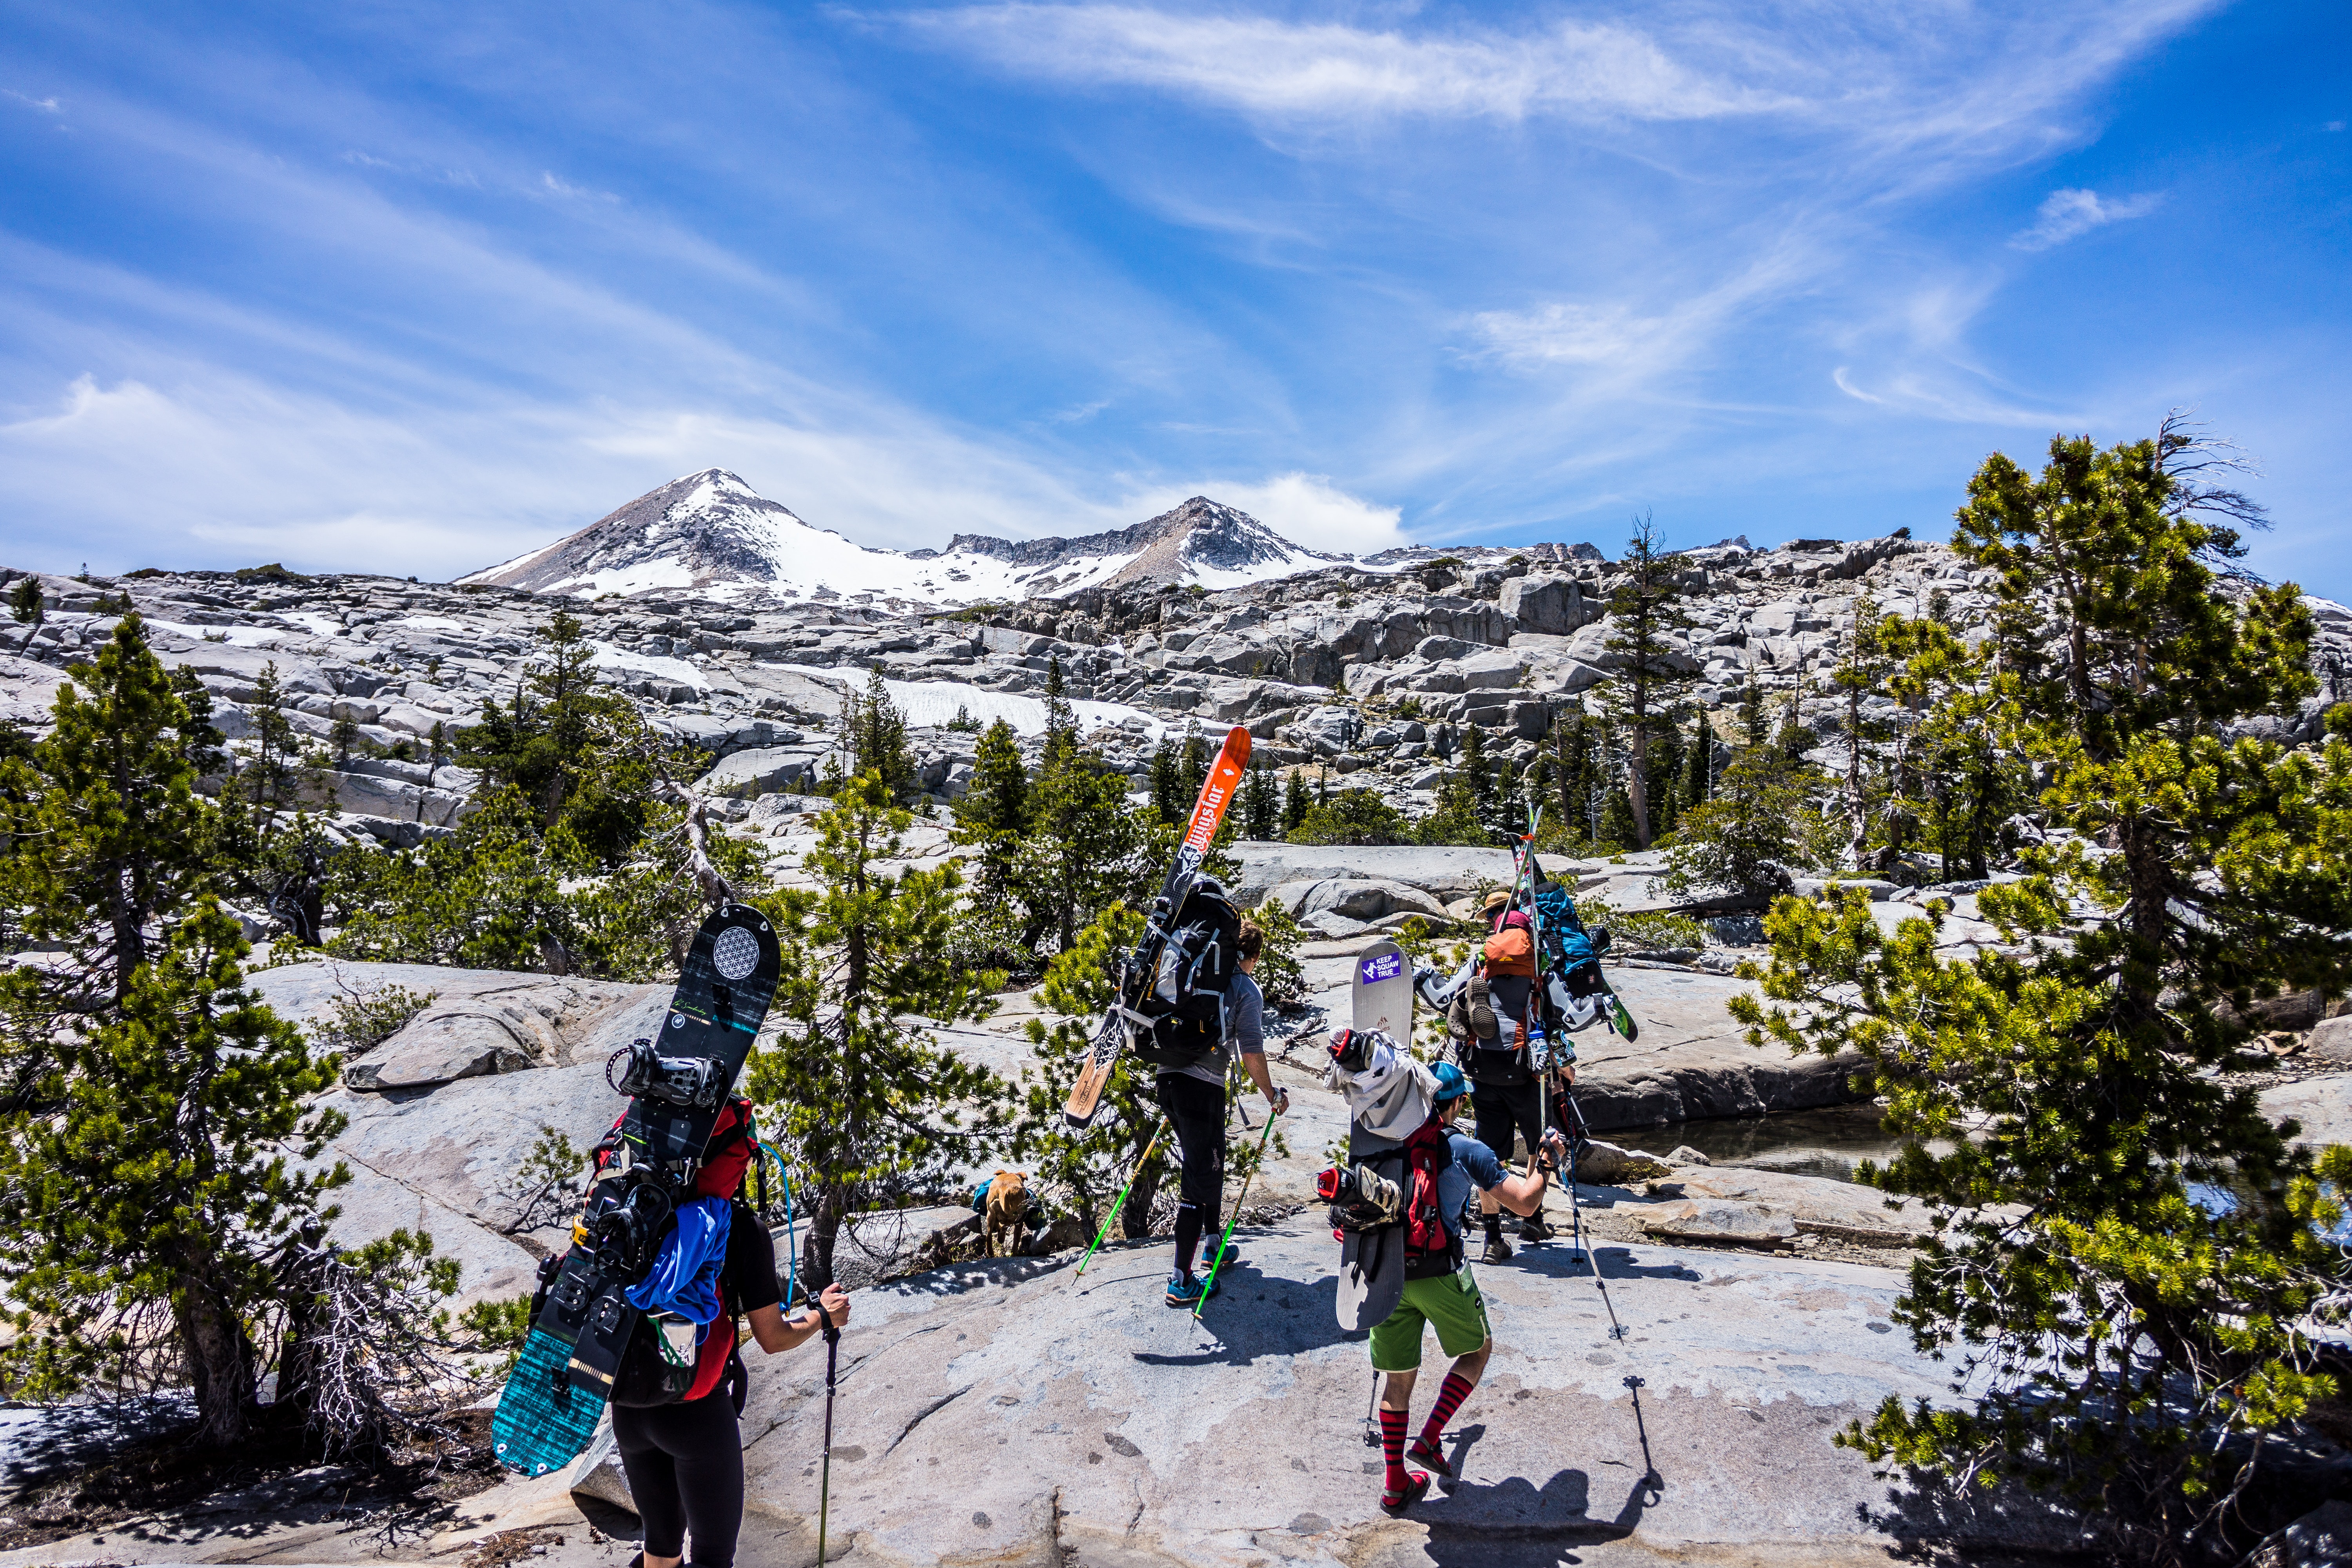 Group of people hiking with snowboards under blue cloudy sky photo